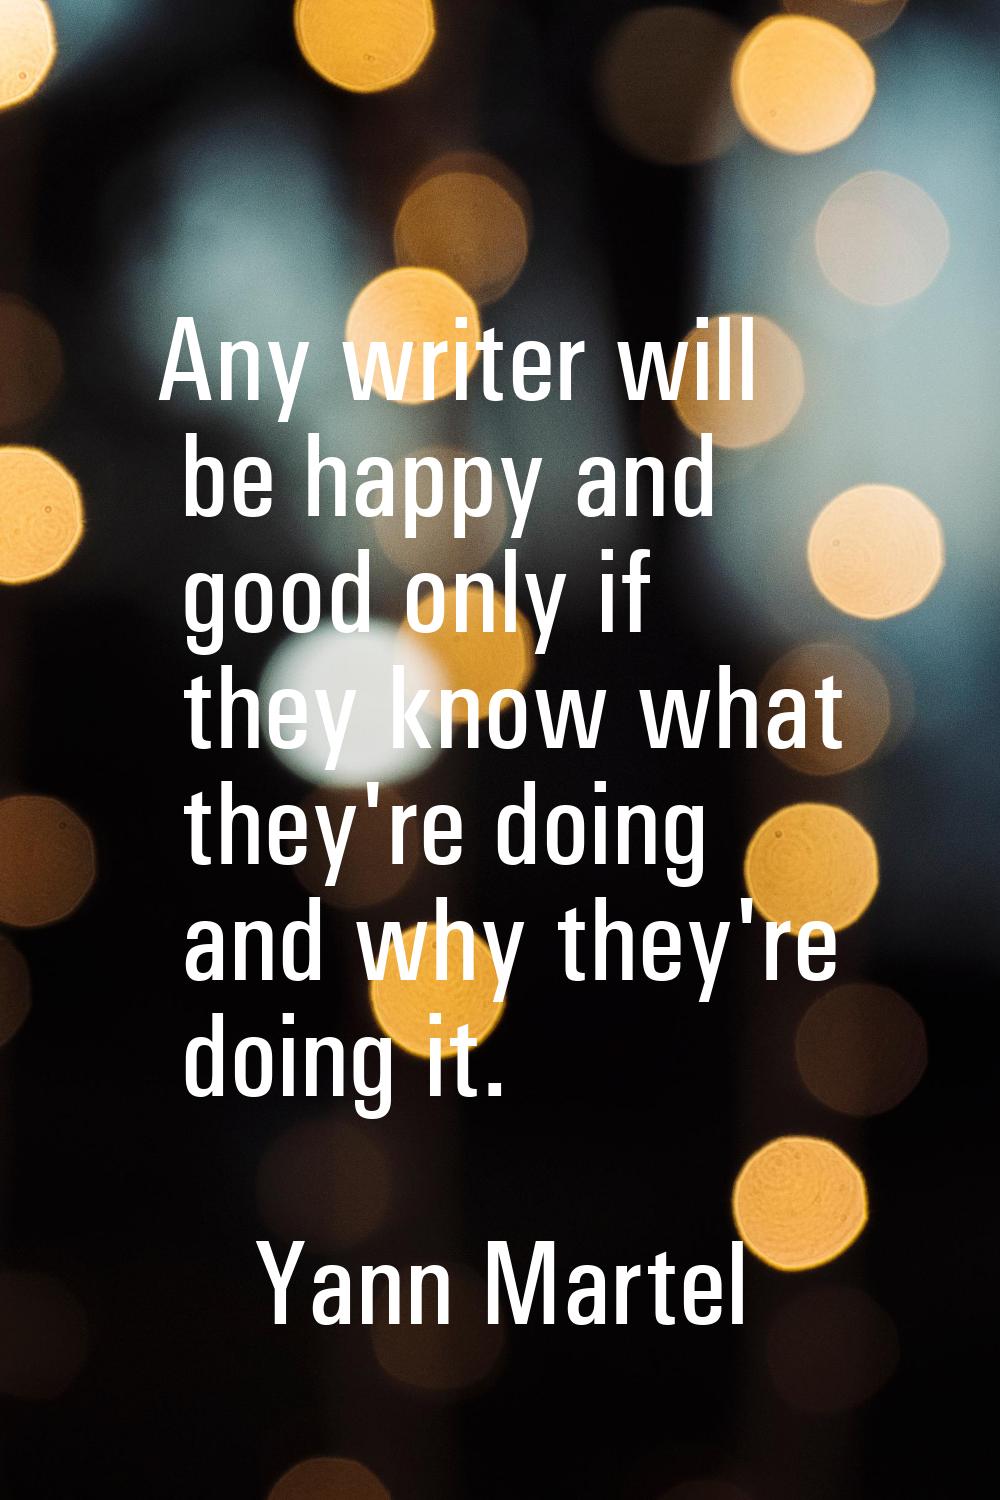 Any writer will be happy and good only if they know what they're doing and why they're doing it.